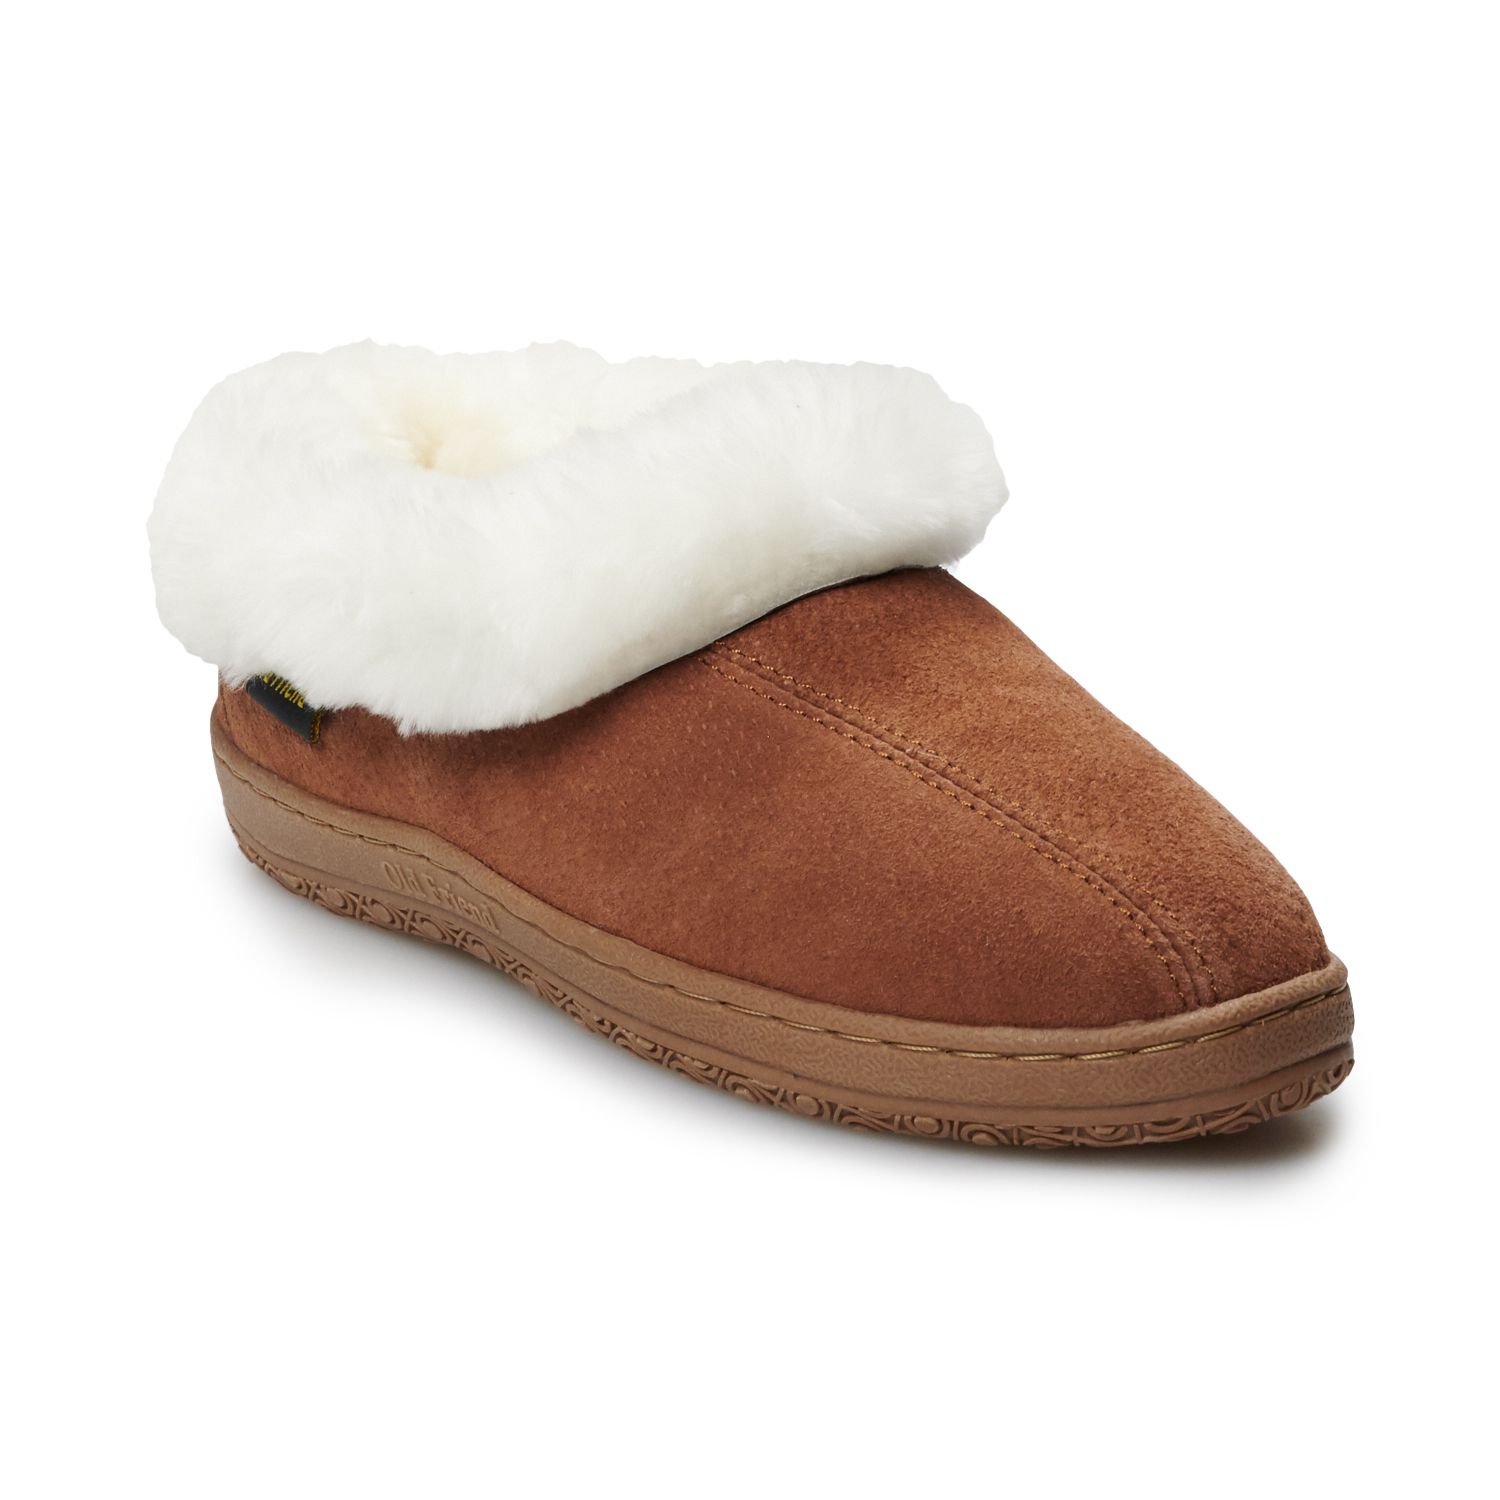 old friend womens slippers